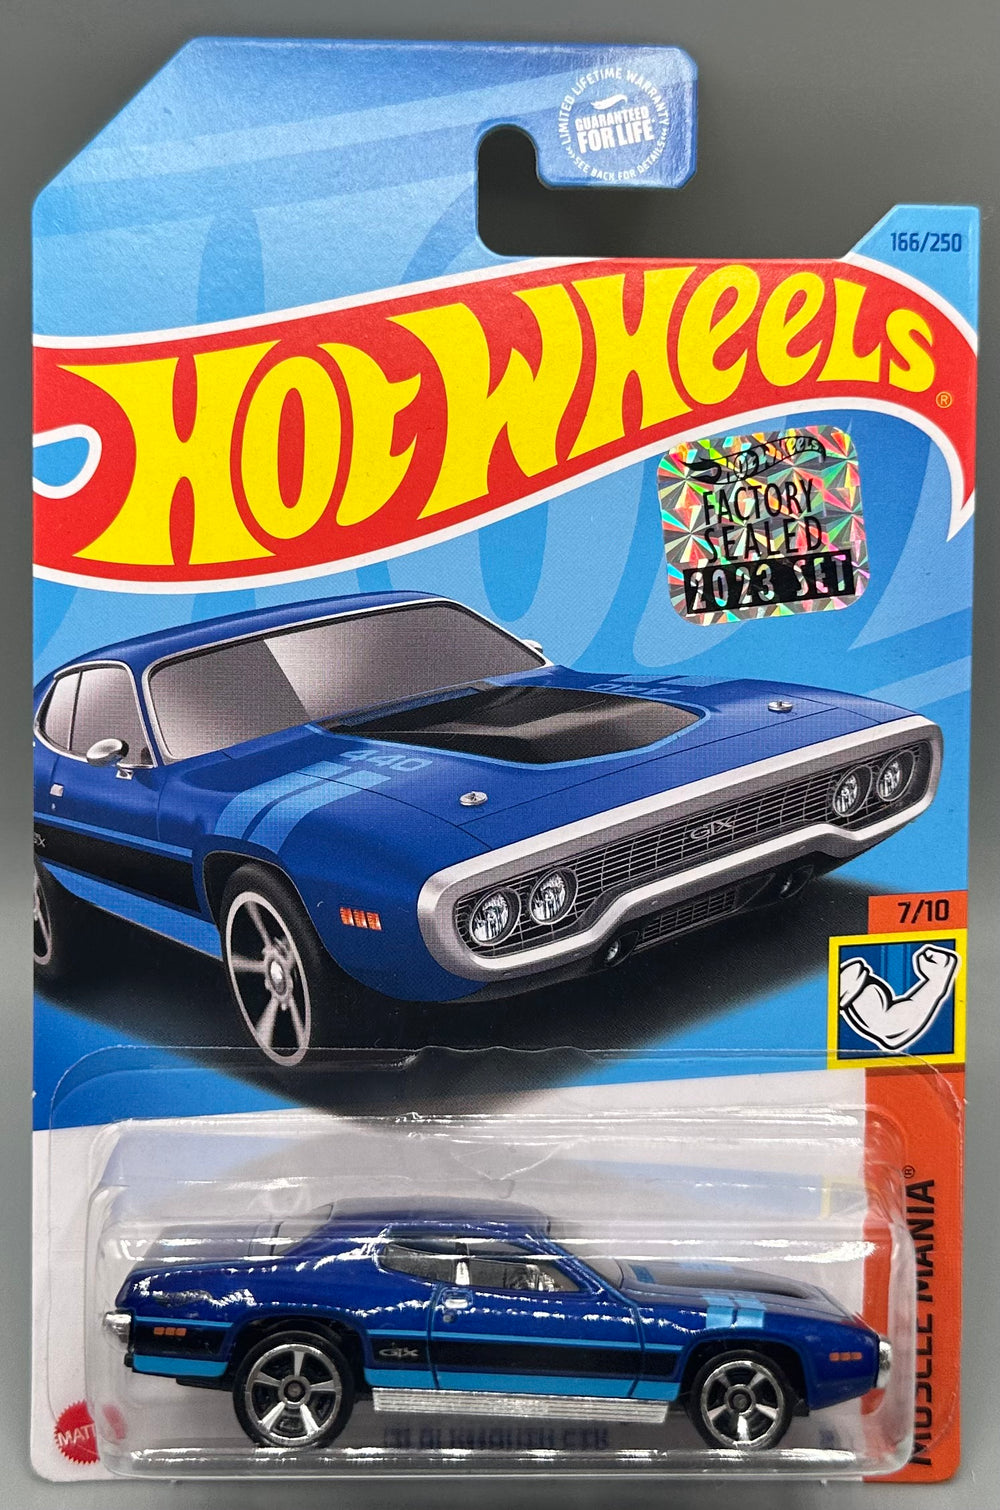 Hot Wheels '71 Plymouth GTX Factory Sealed